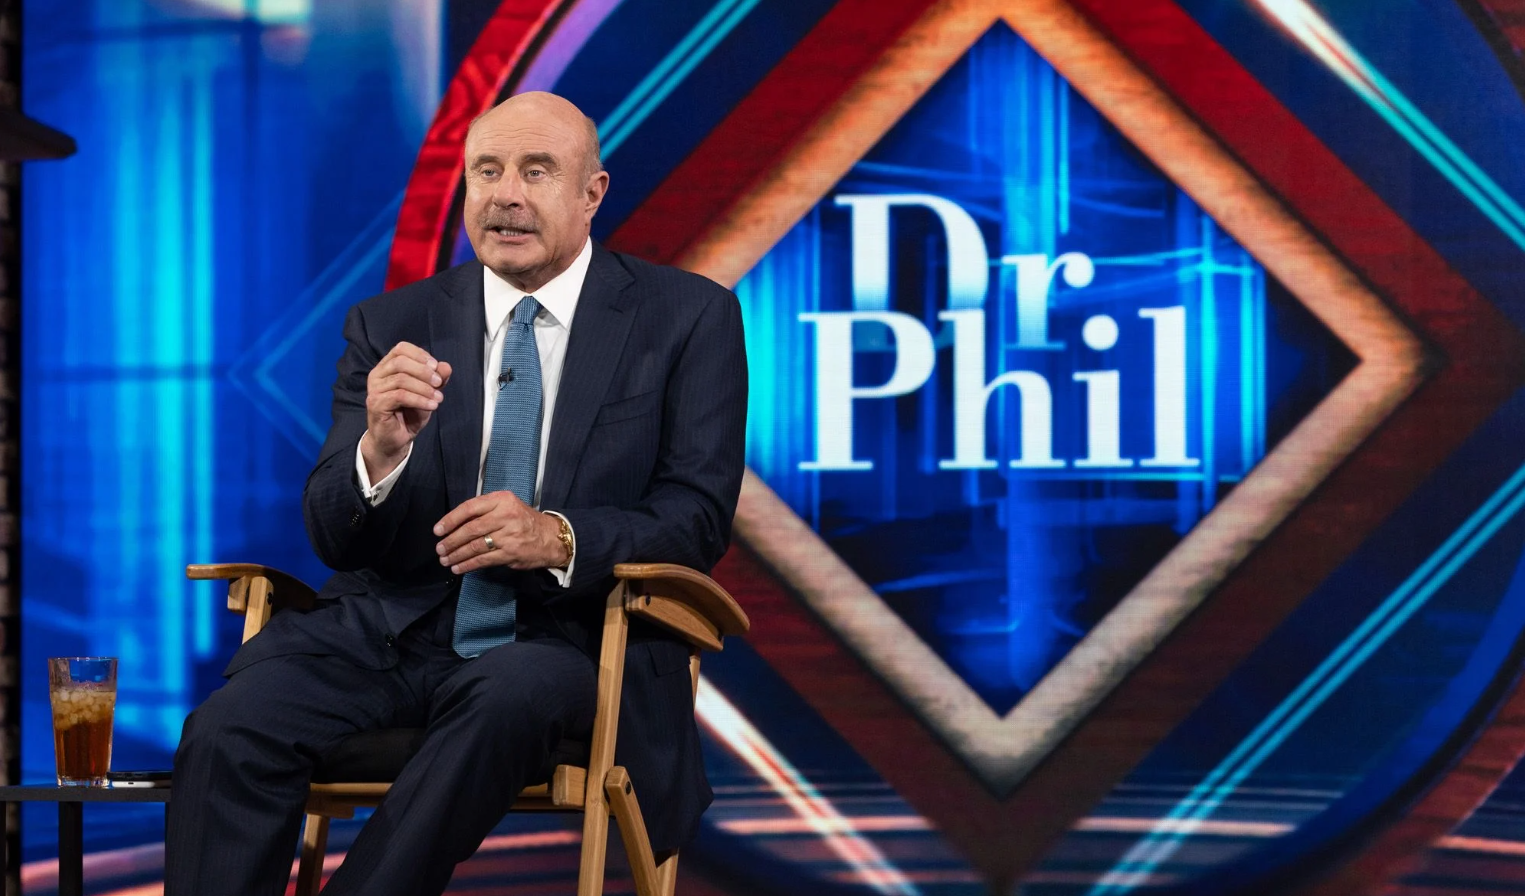 Dr. Phil’s New TV Network Will Launch on More Than 30 TV Stations